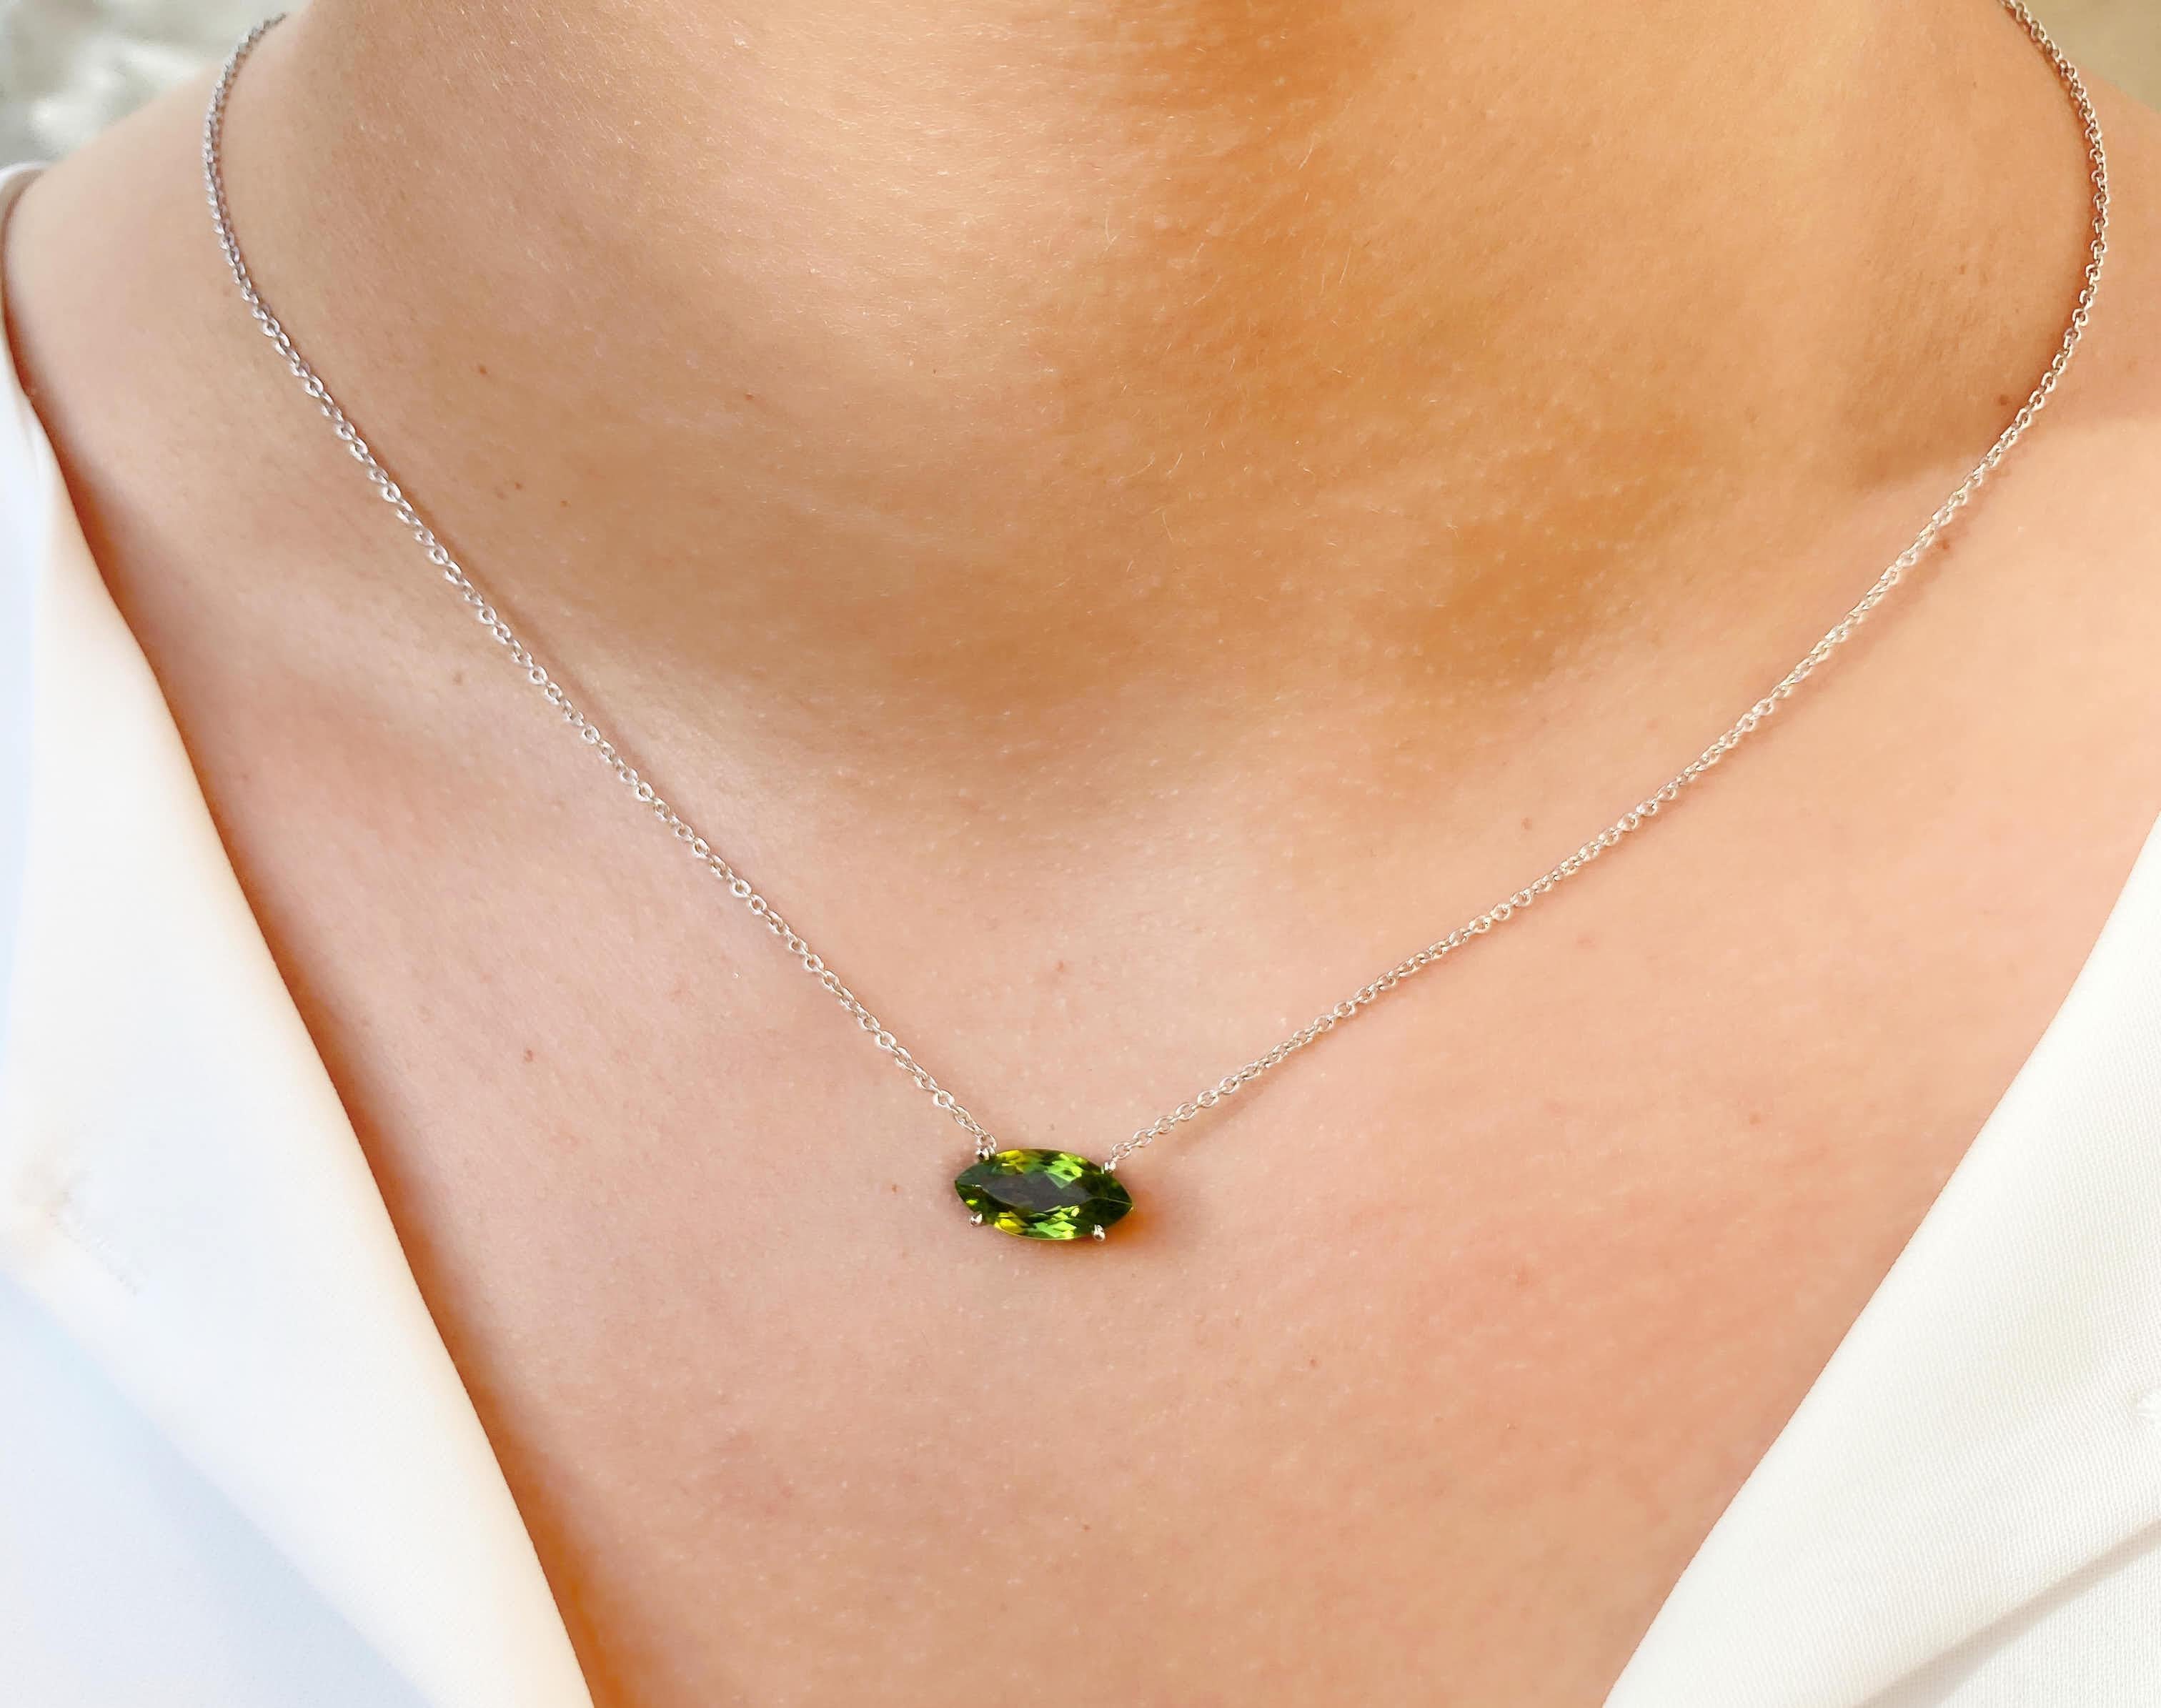 •	18 Karat Recycled White Gold 
•	42 cm chain with extension
•	Available color: White Gold
•	Peridot 12×6 mm marquise cut
•	Origin: Caparaó mine, Brazil
•	Hand-made in Spain
•	If you need any orders expedited, please contact 1stdibs and we will try